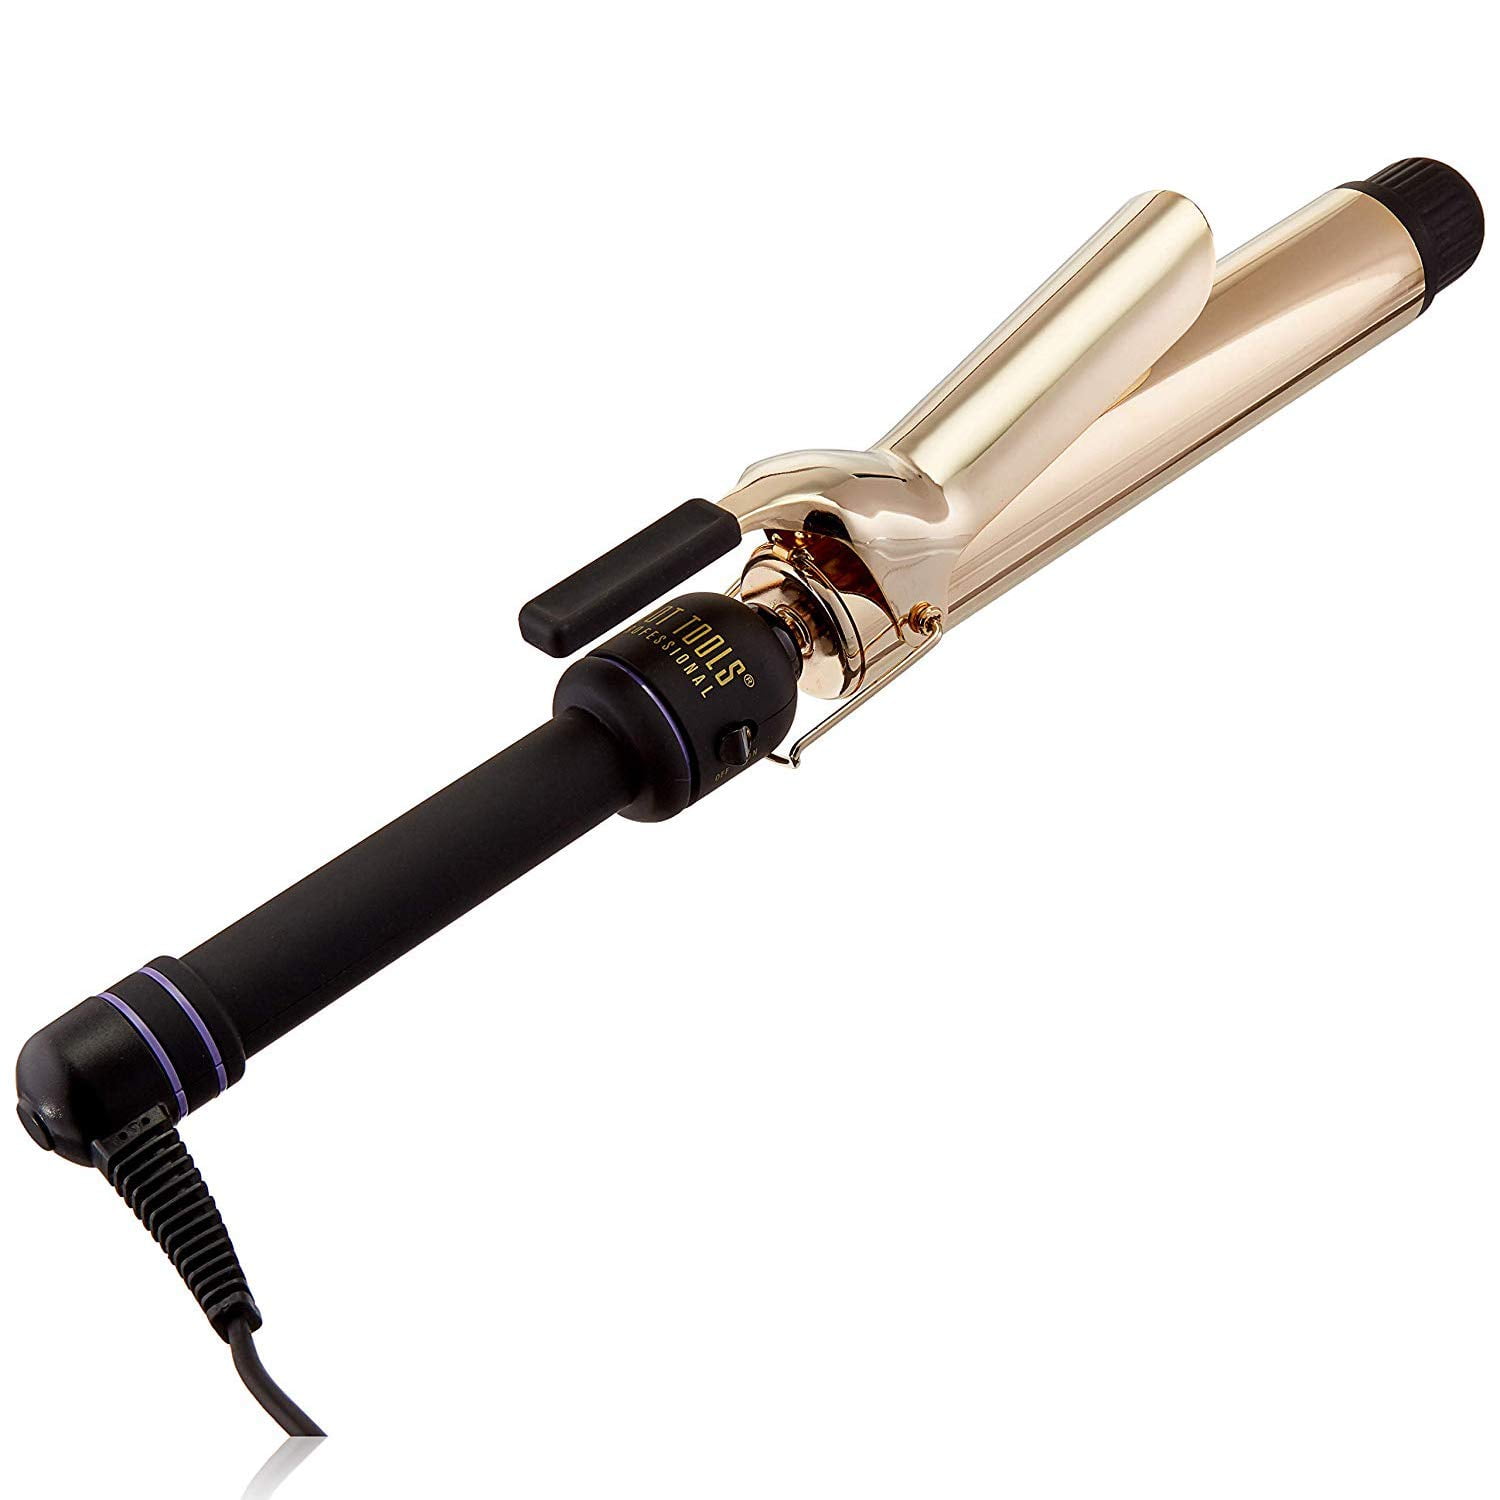 1.5 inch travel curling iron